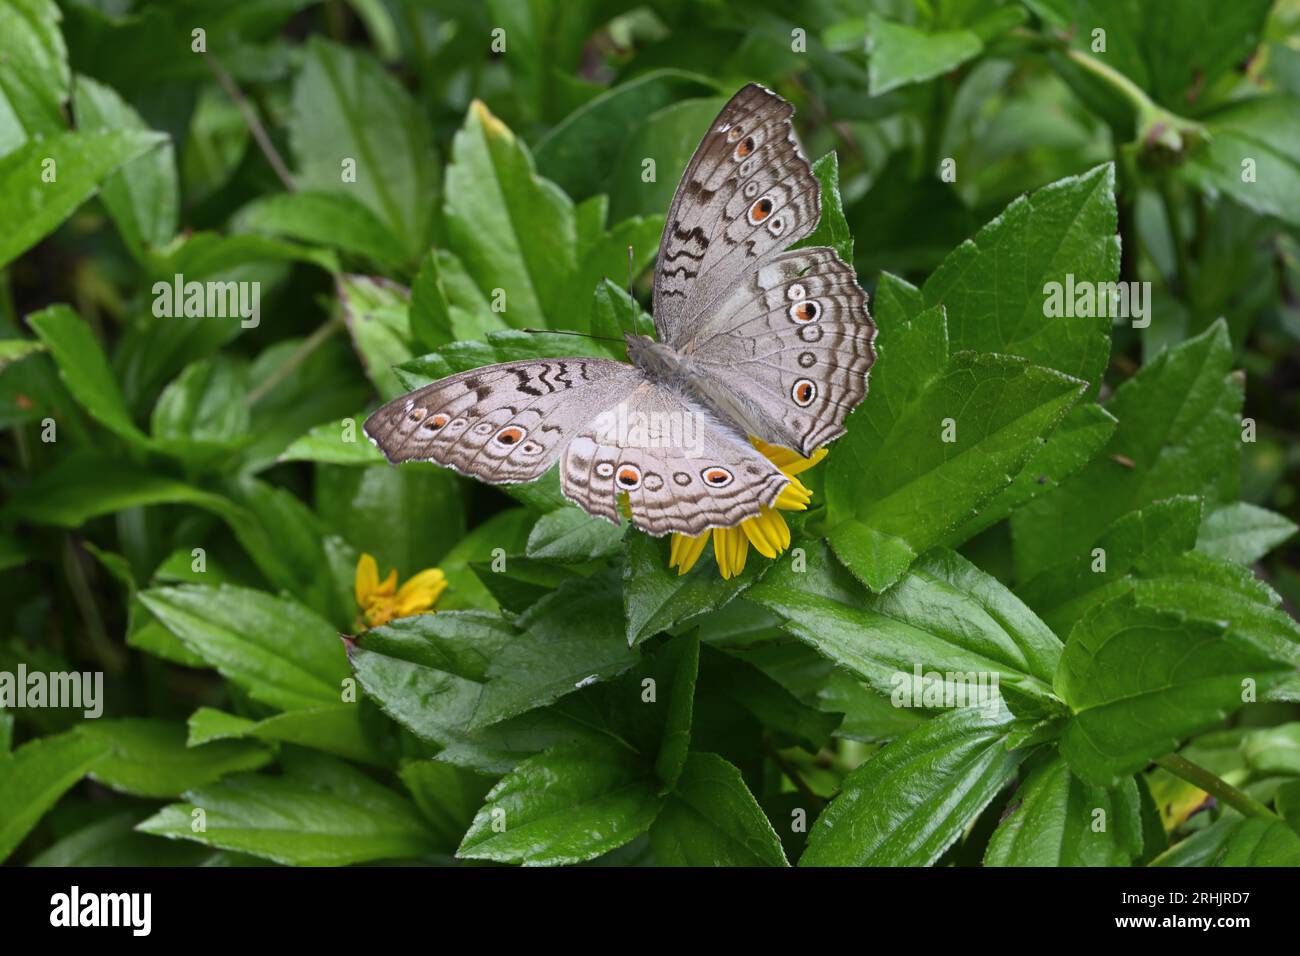 High angle view of a Grey Pansy butterfly (Junonia Atlites) spreading its wings while sitting on a Wedelia flower (Sphagneticola Trilobata) Stock Photo